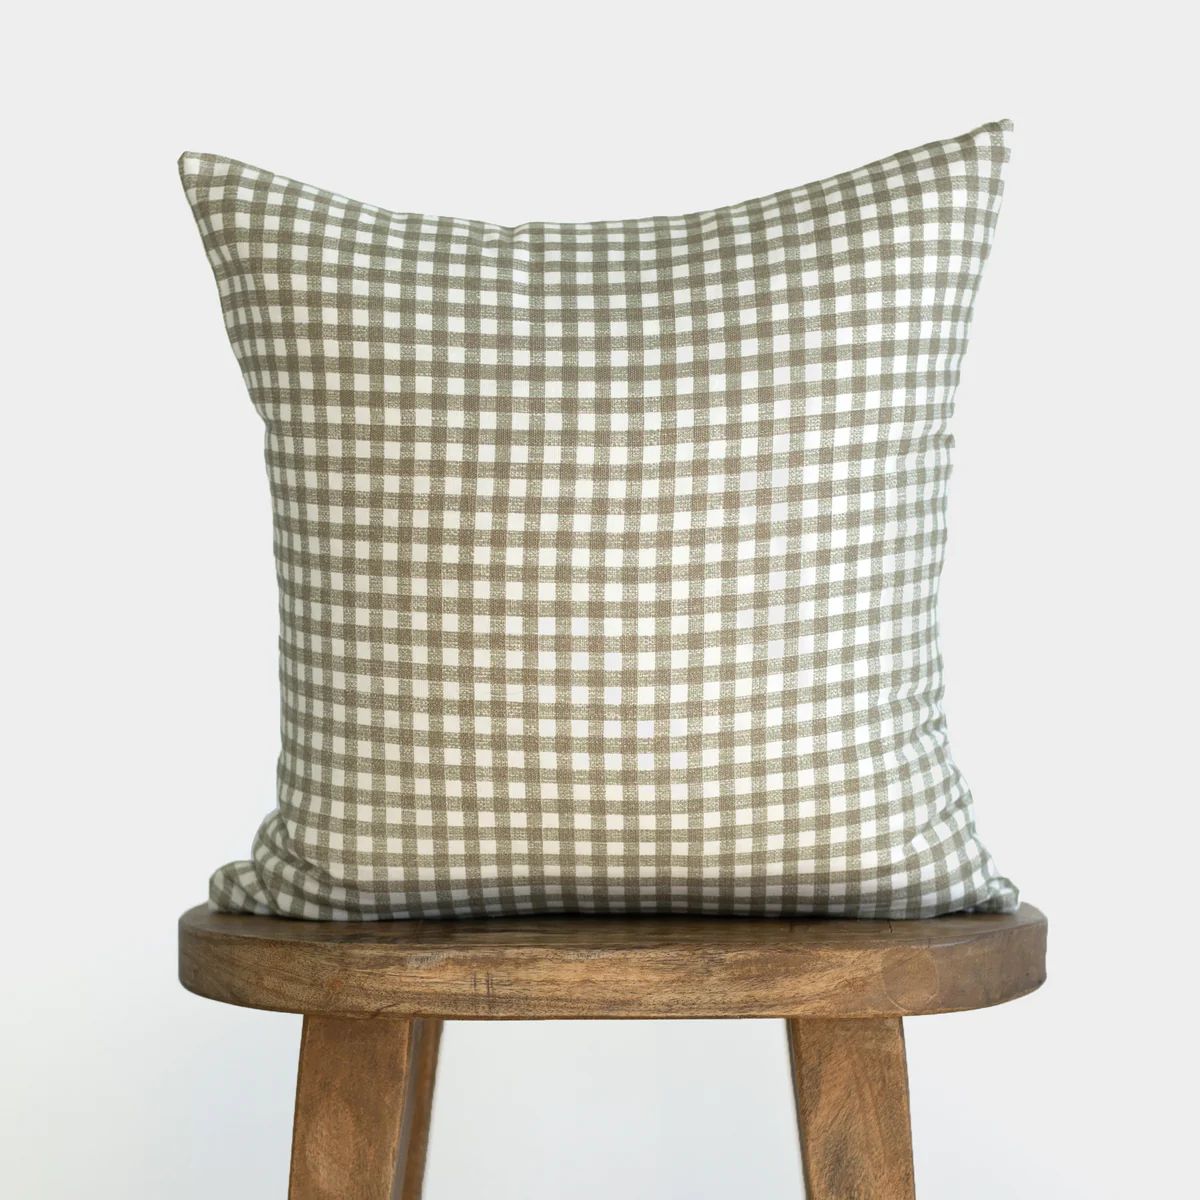 Gingham - 18" | 22" | 26" | 12x20" | Woven Nook